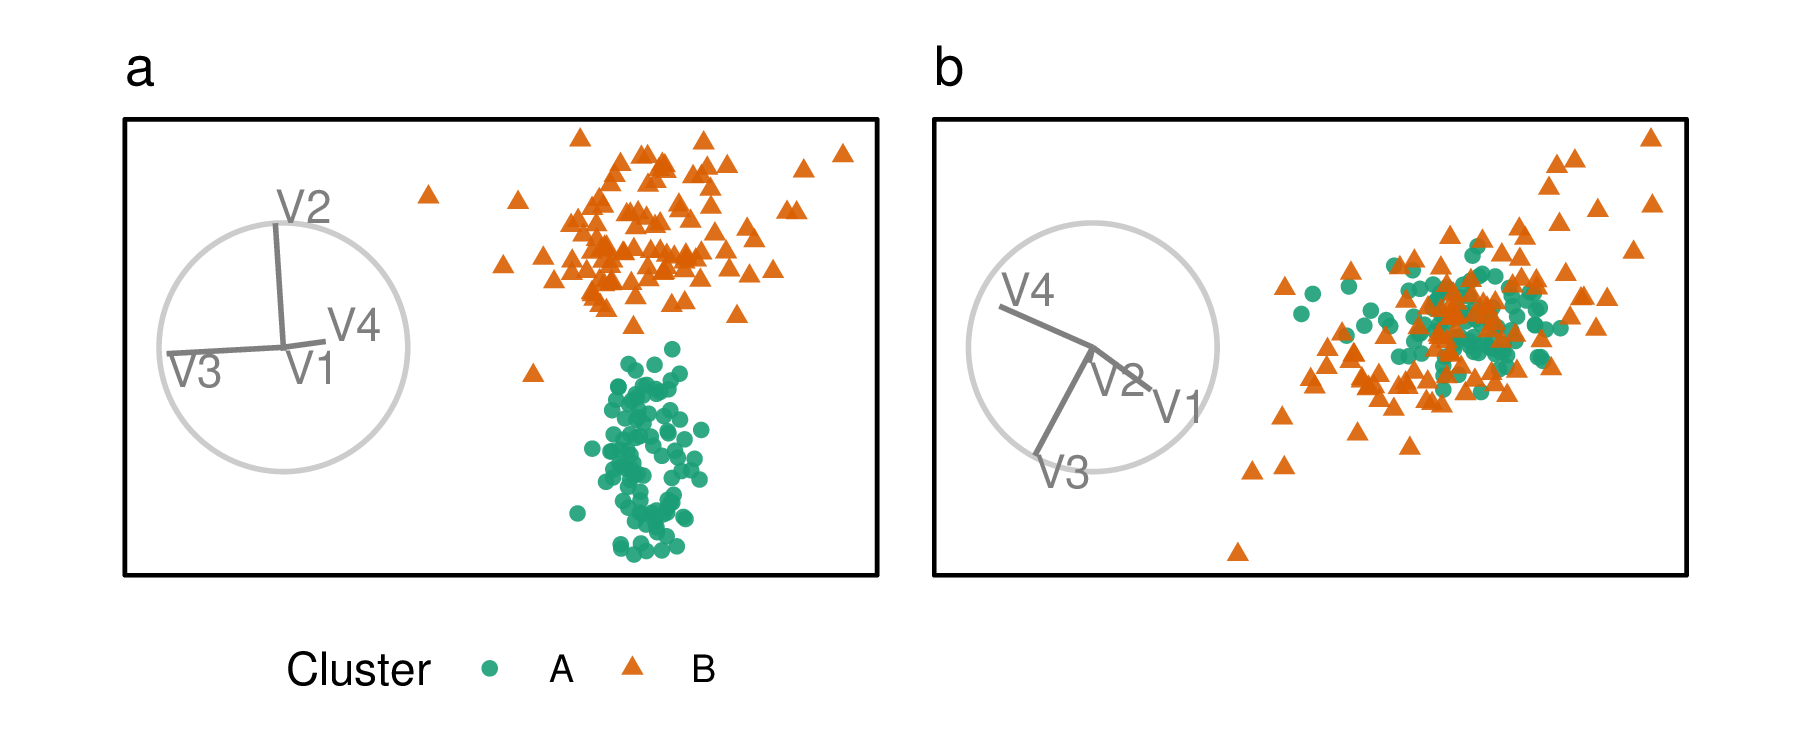 Illustration of cluster separation affected by variable importance. Panel (a) is a projection mostly of V2 and V3, and the separation between clusters is in the direction of V2, not V3. This suggests V2 is important for clustering, but V3 is not. Panel (b) shows a projection of mostly V3 and V4, with no contribution from V2 and little from V3. The absence of separation between the clusters indicates that V3 and V4 are not important.